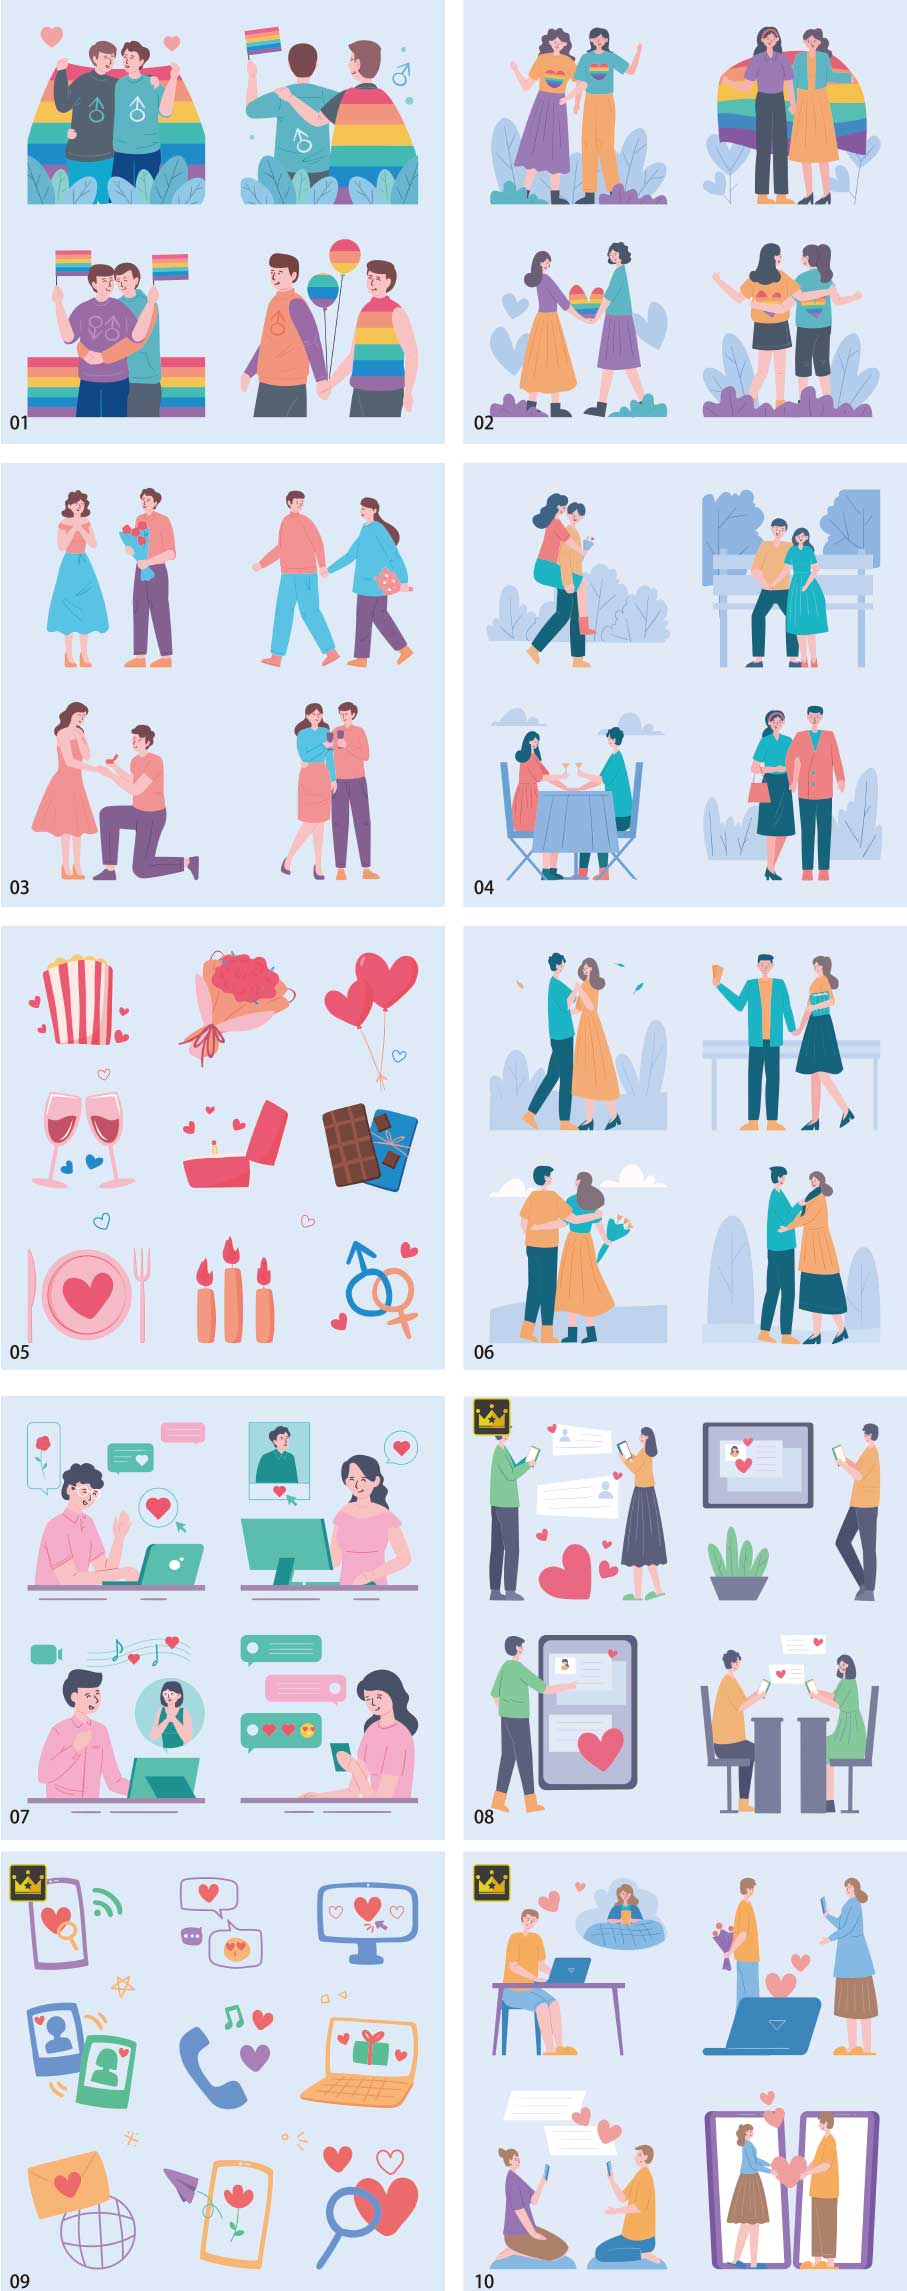 Dating illustration collection